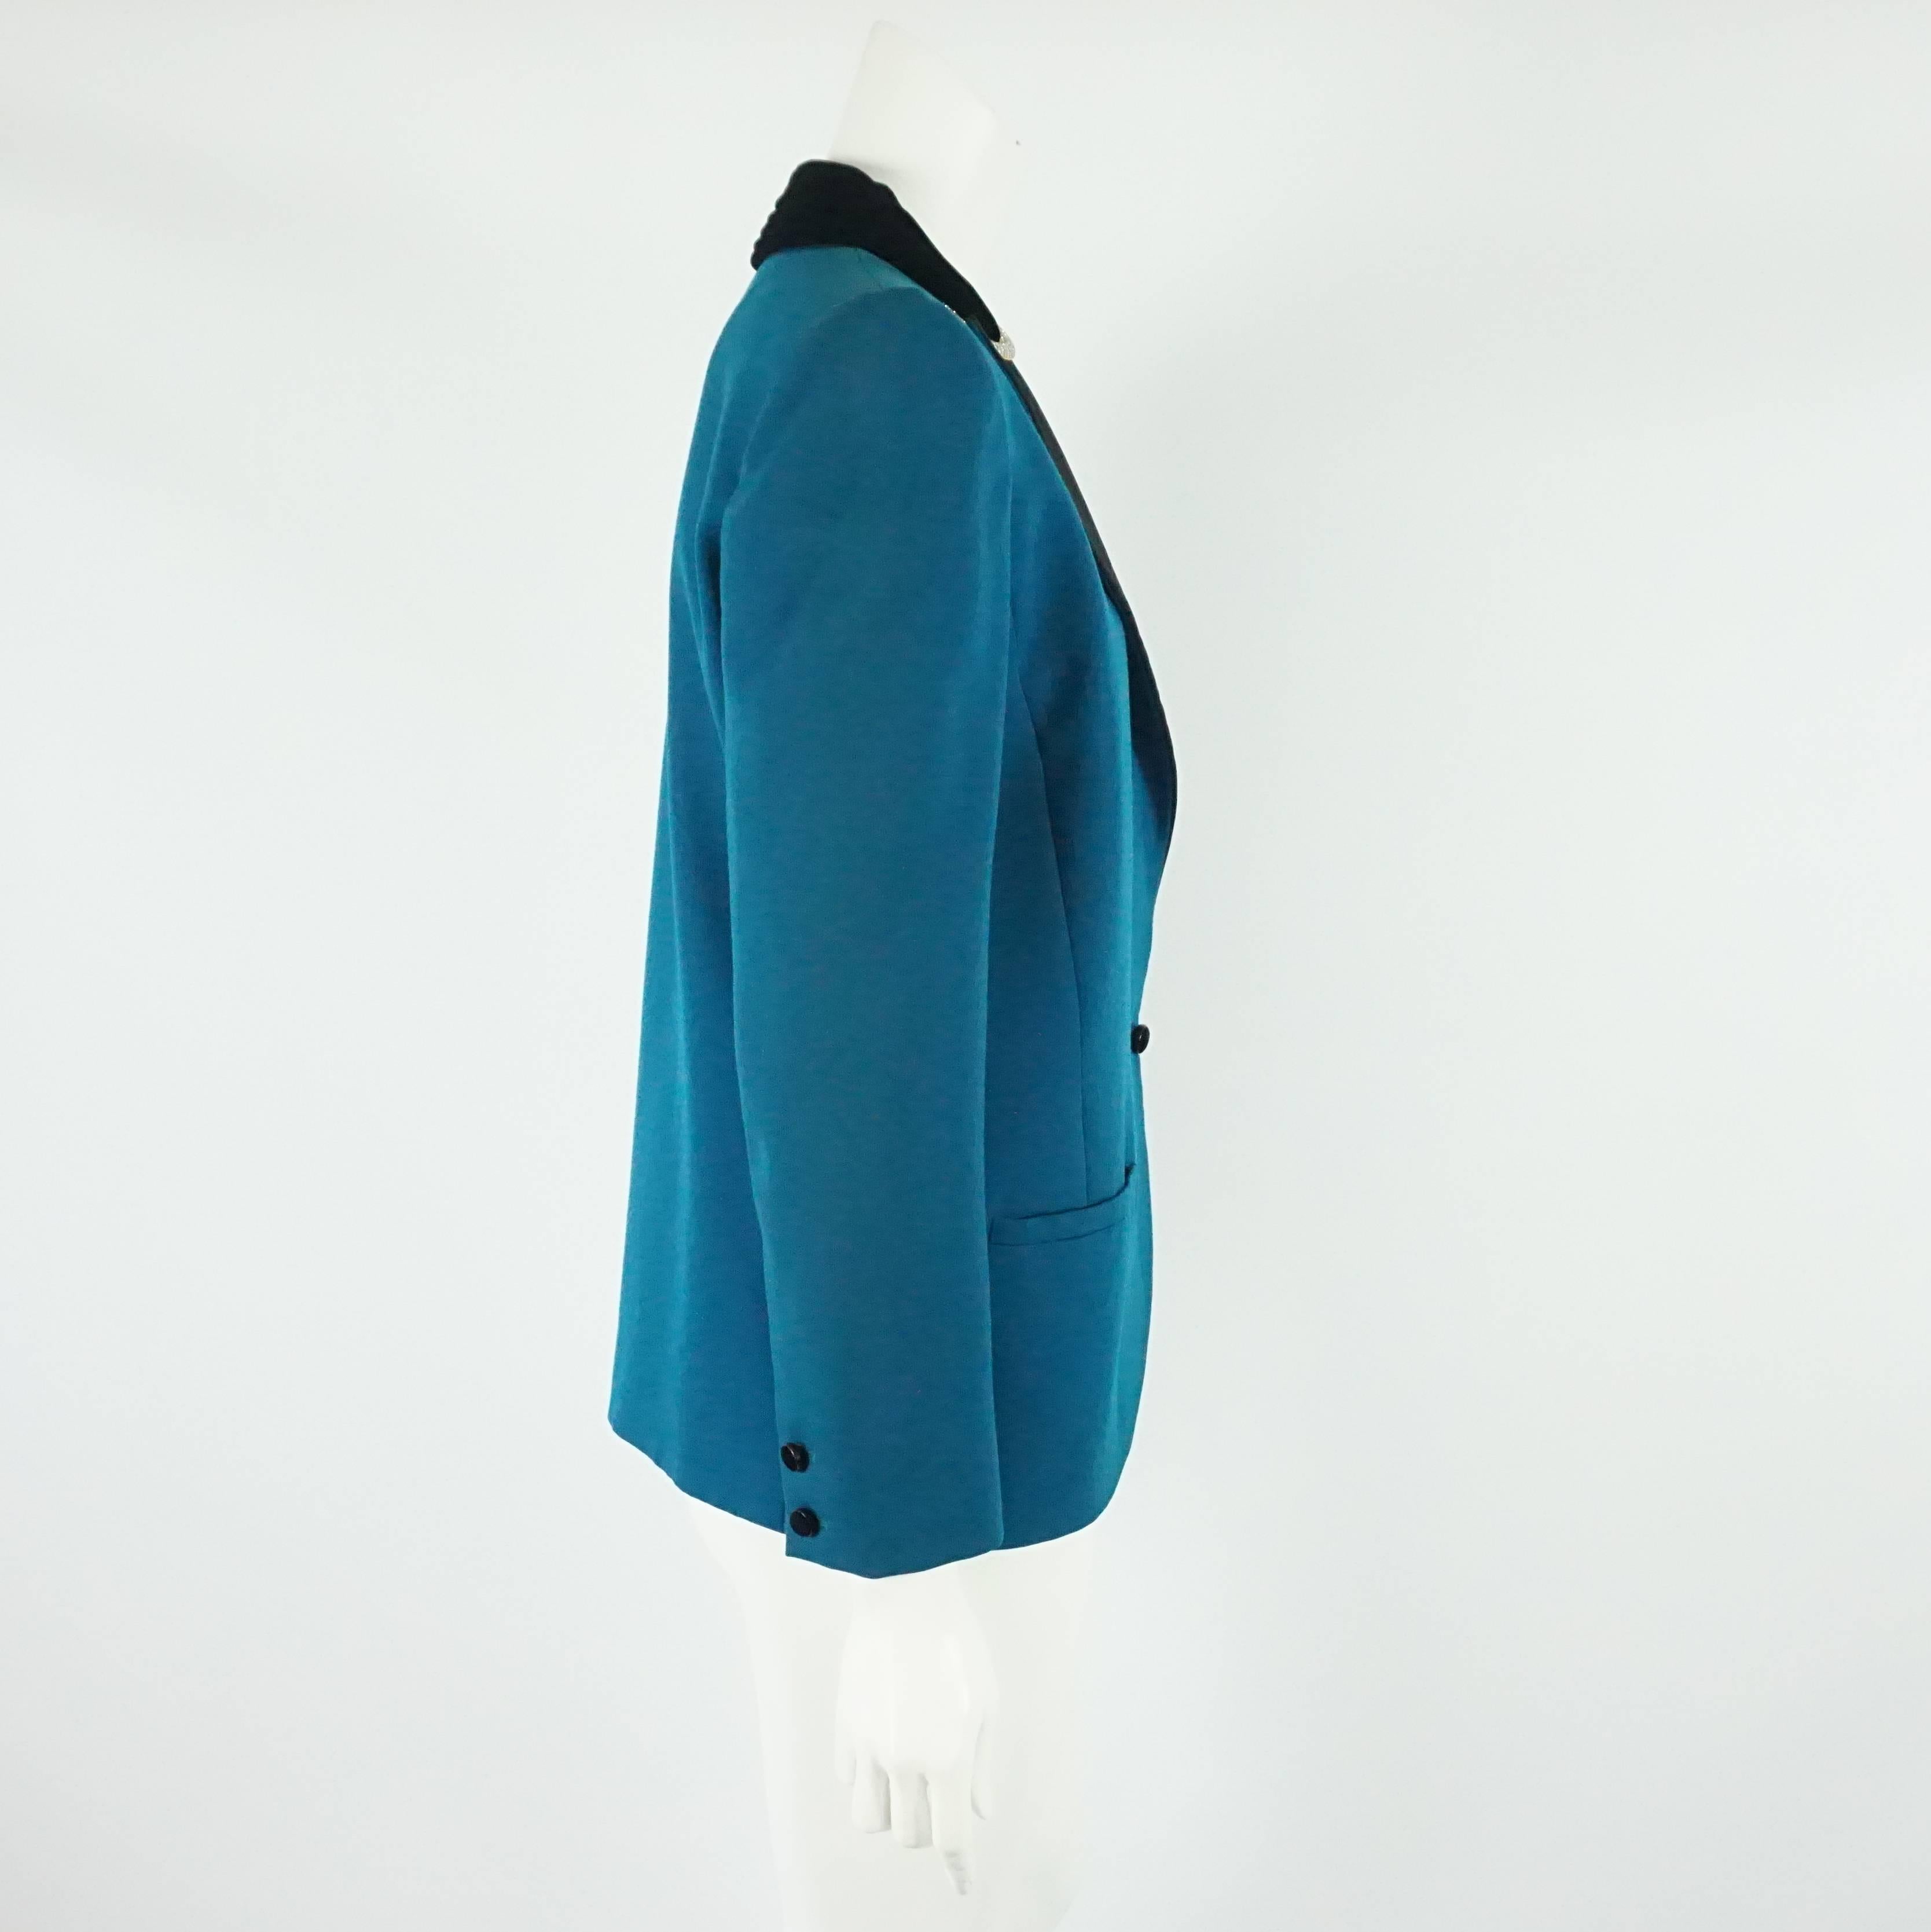 Valentino Boutique Turquoise lightweight wool tuxedo style jacket-8-Circa 80's  This very unique vintage Valentino jacket has a beautiful turquoise color, with a black silk faille and velvet lapel and collar with gold/silver and rhinestone ornament